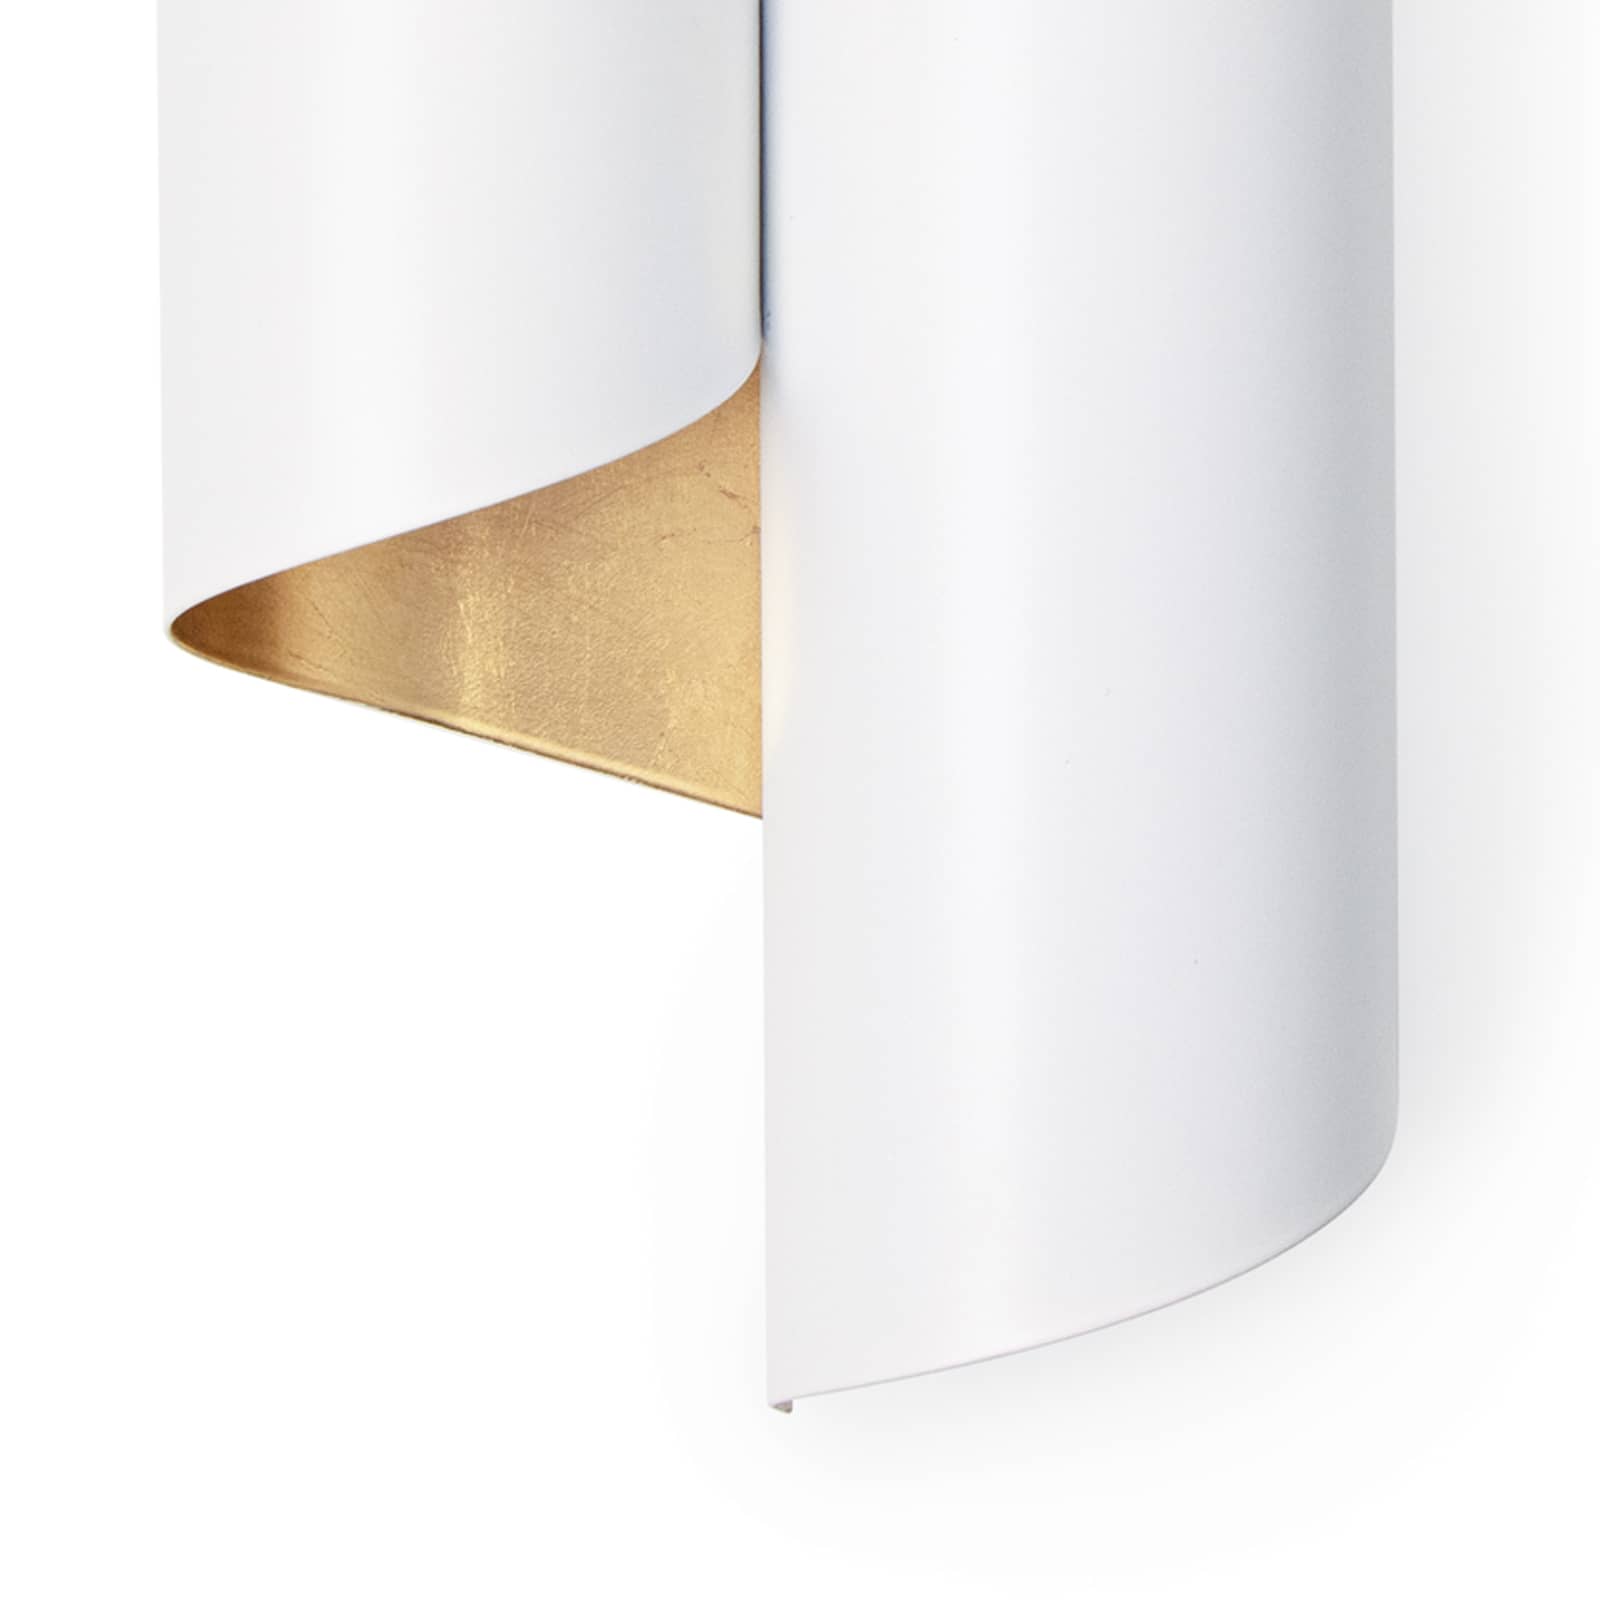 Folio Sconce in White and Gold by Regina Andrew